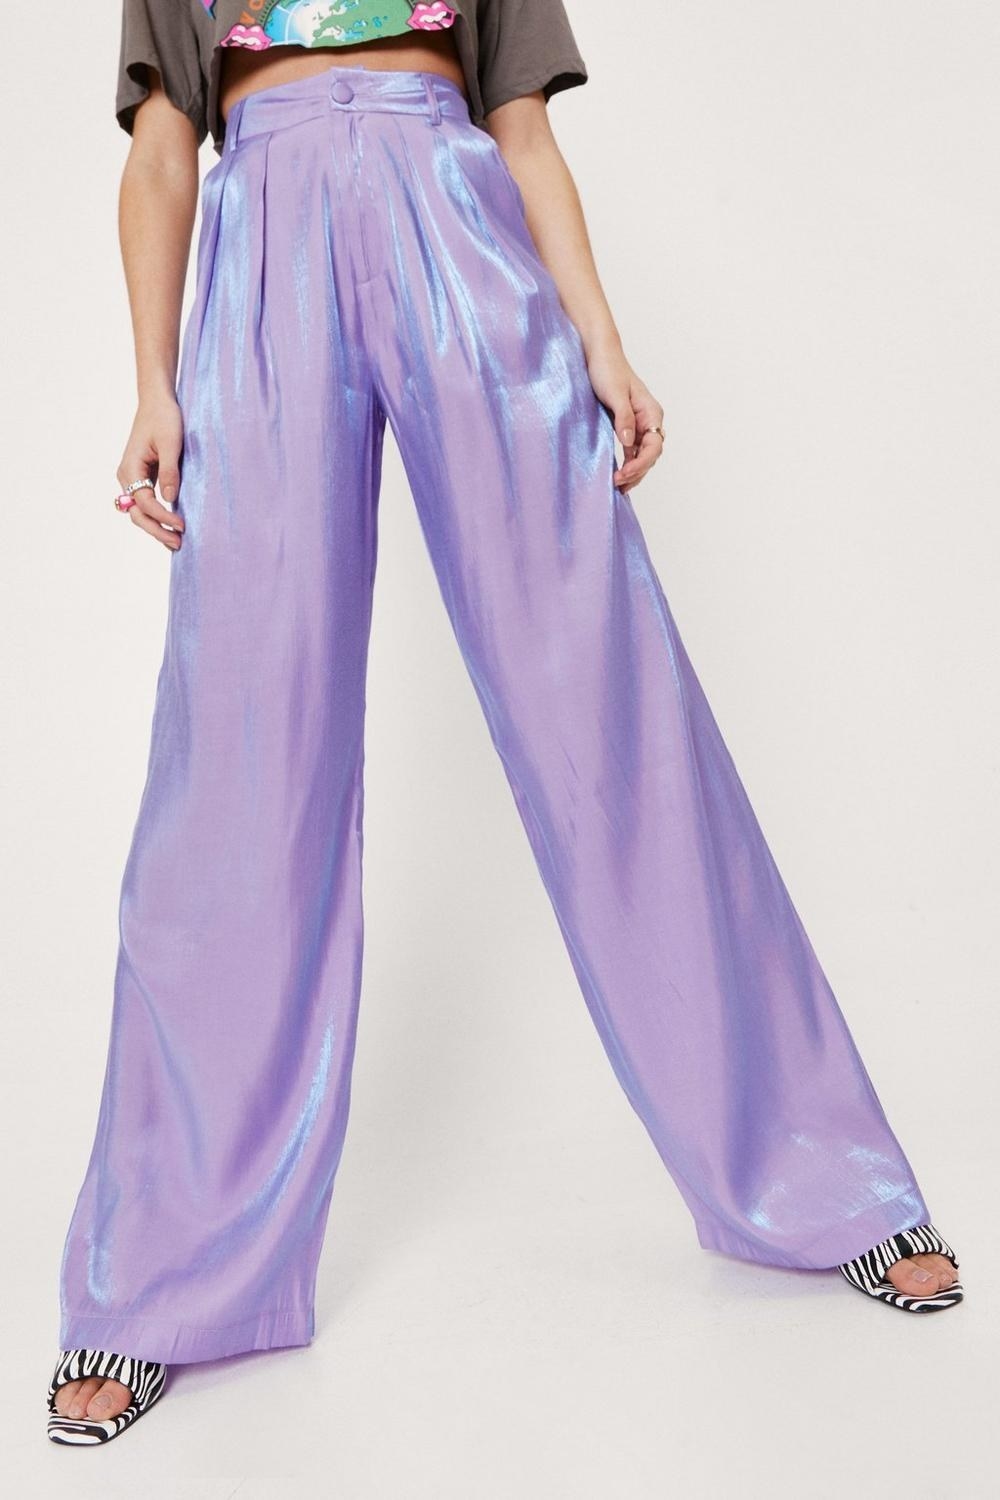 a person wearing a pair of wide legged metallic pants 